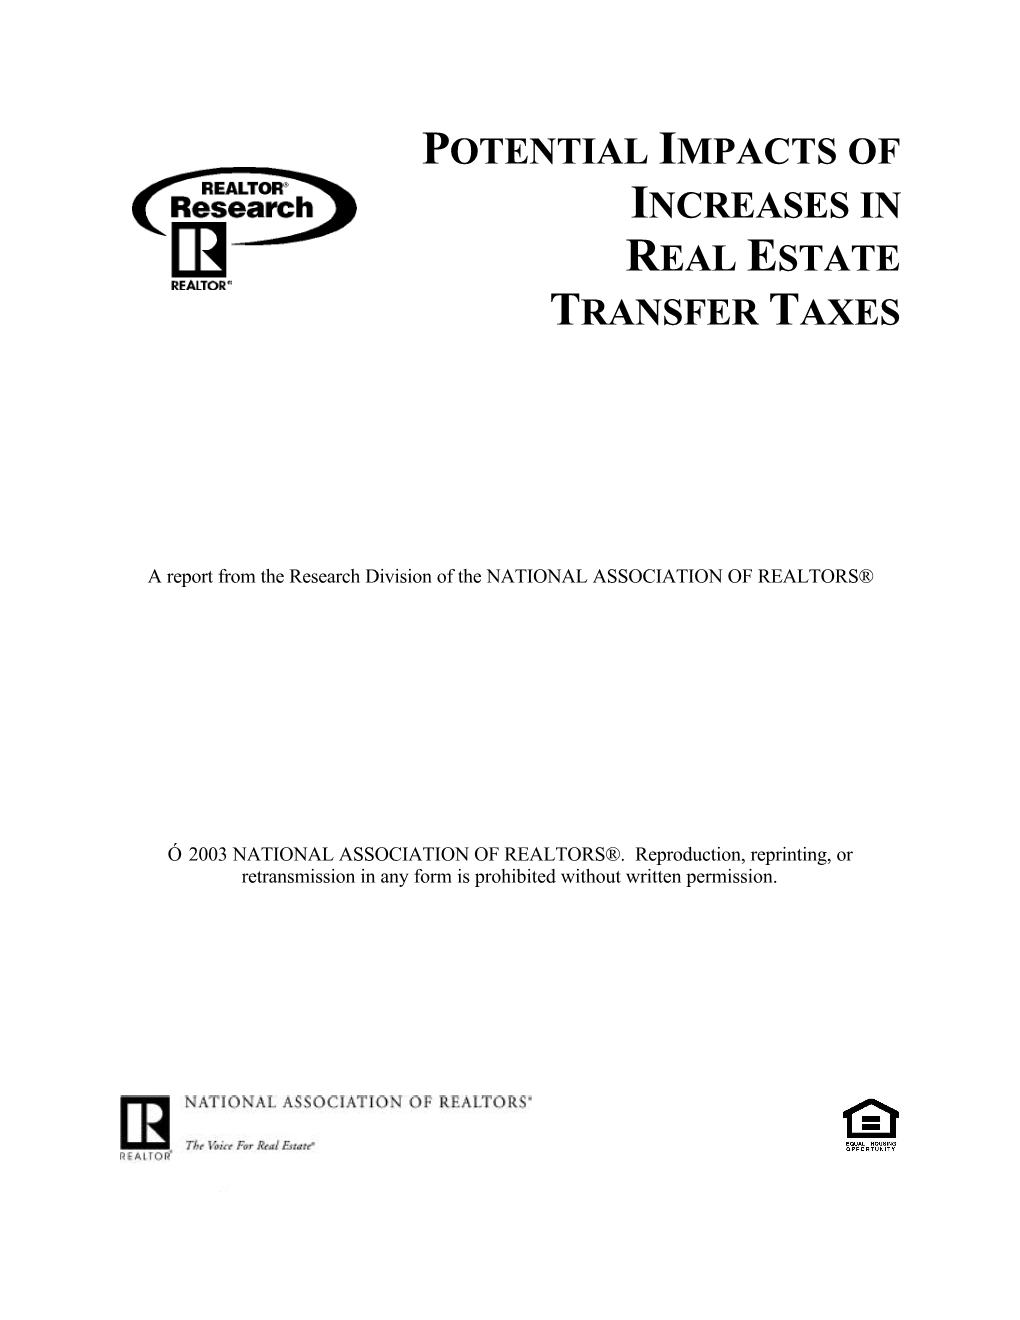 Potential Impacts of Increases in Real Estate Transfer Taxes